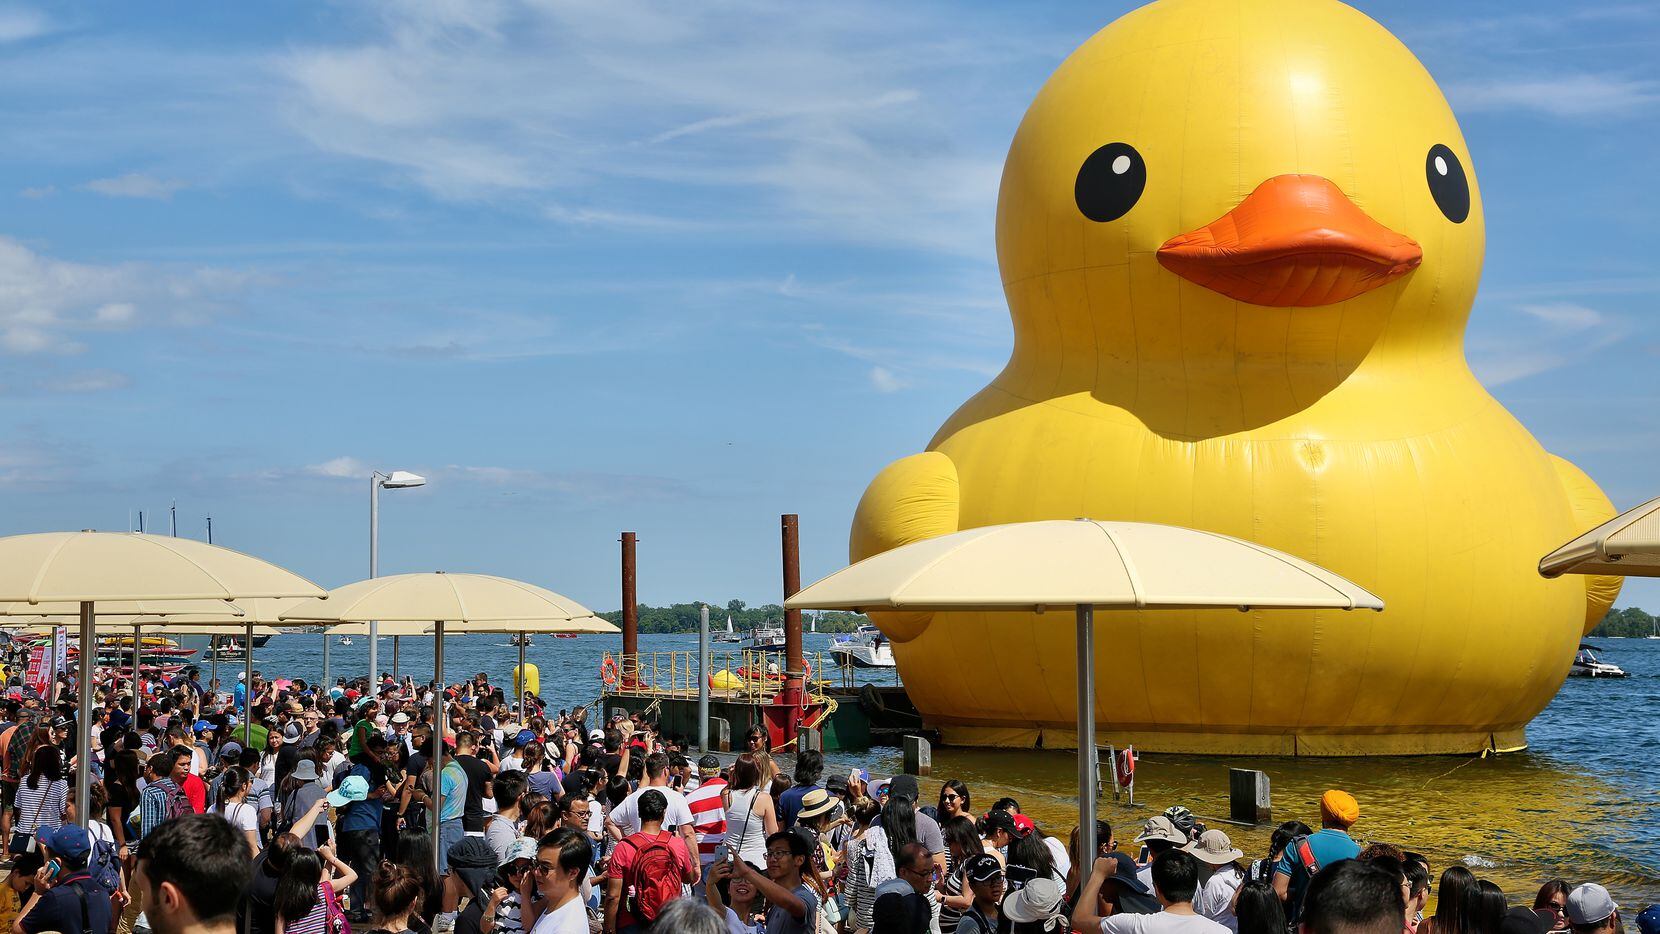 The giant rubber duck appeared in Toronto on July 3, 2017. The duck, created by Dutch artist Florentijn Hofman, will be re-created in Fort Worth this month.